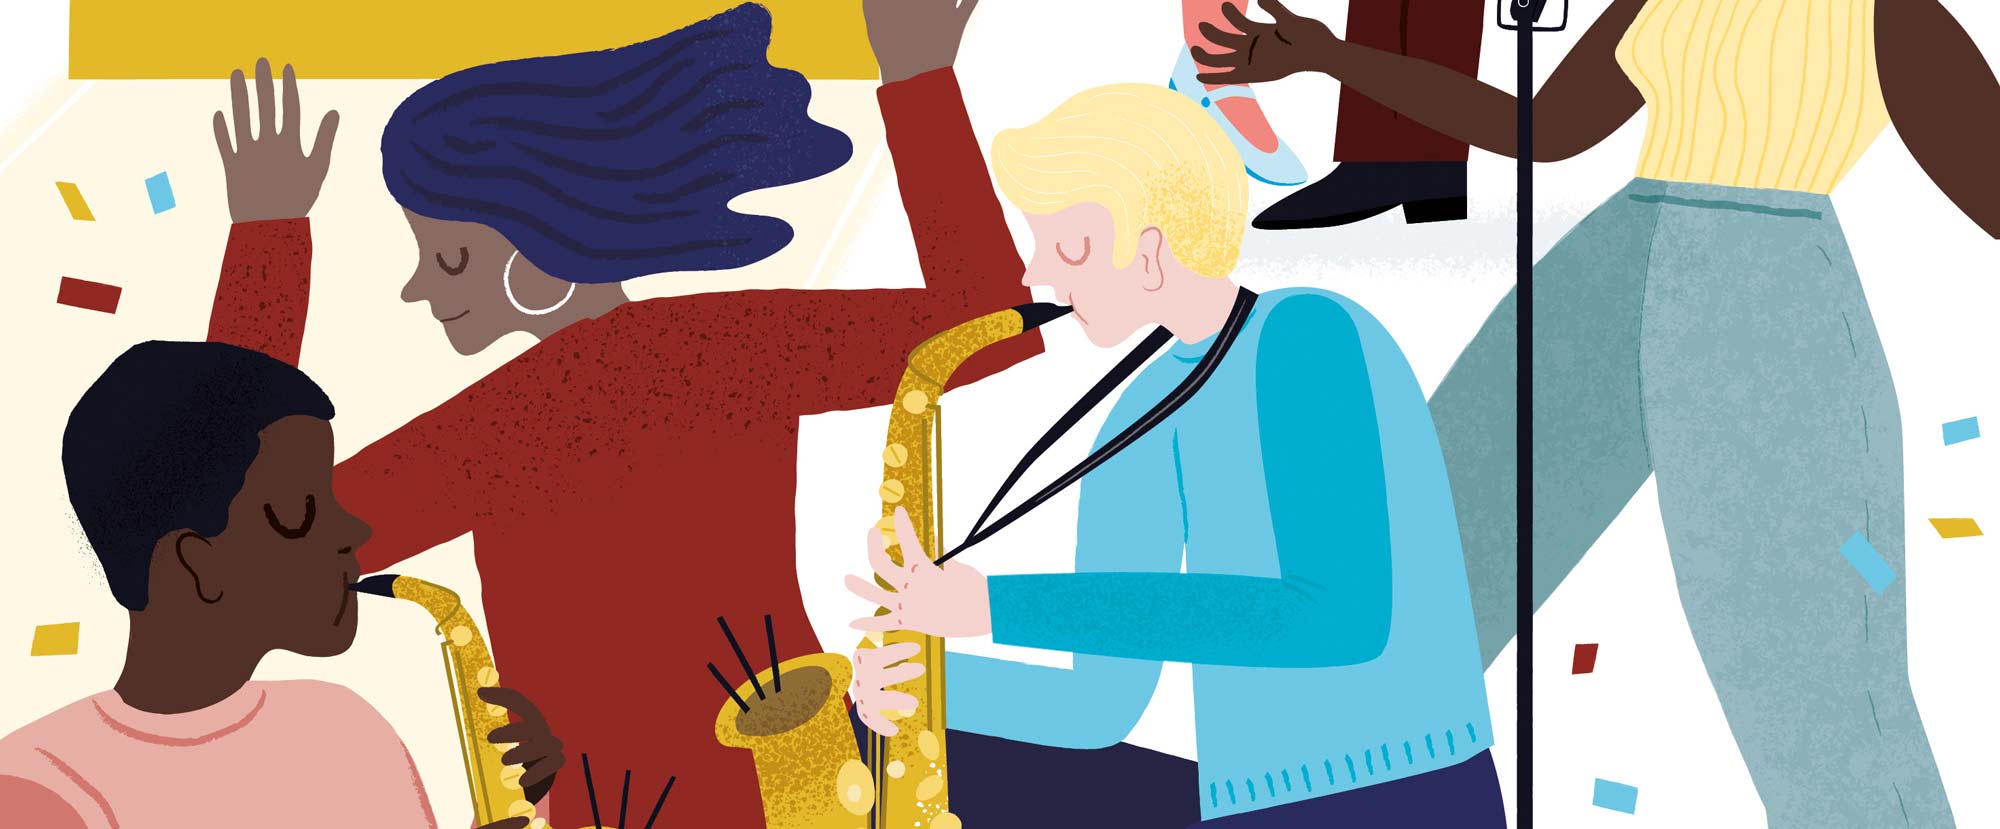 Section of illustrated poster for Ronnie Scott's Jazz Club by Elly Jahnz